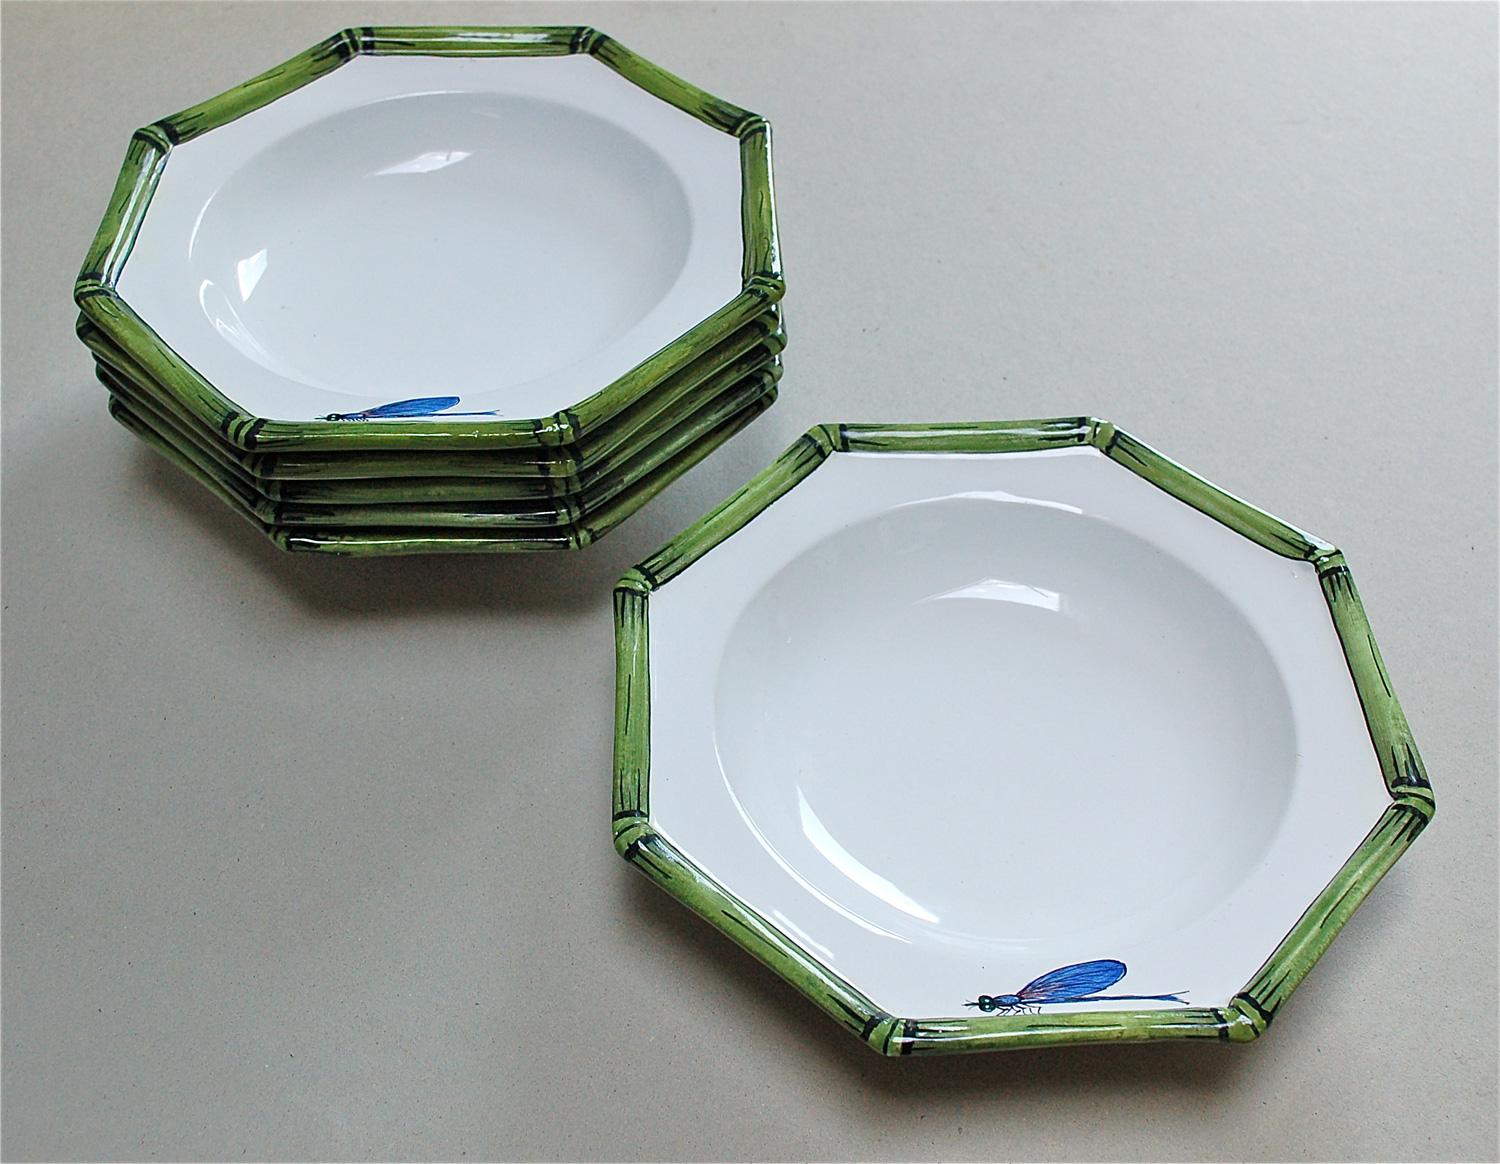 Set of six vintage hand painted Italian pottery soup plates by COSTA with bamboo and dragonfly decoration. Each plate is octagonal in shape. The edge or rim is decorated with a green, hand painted, slightly raised bamboo motif. A hand painted blue